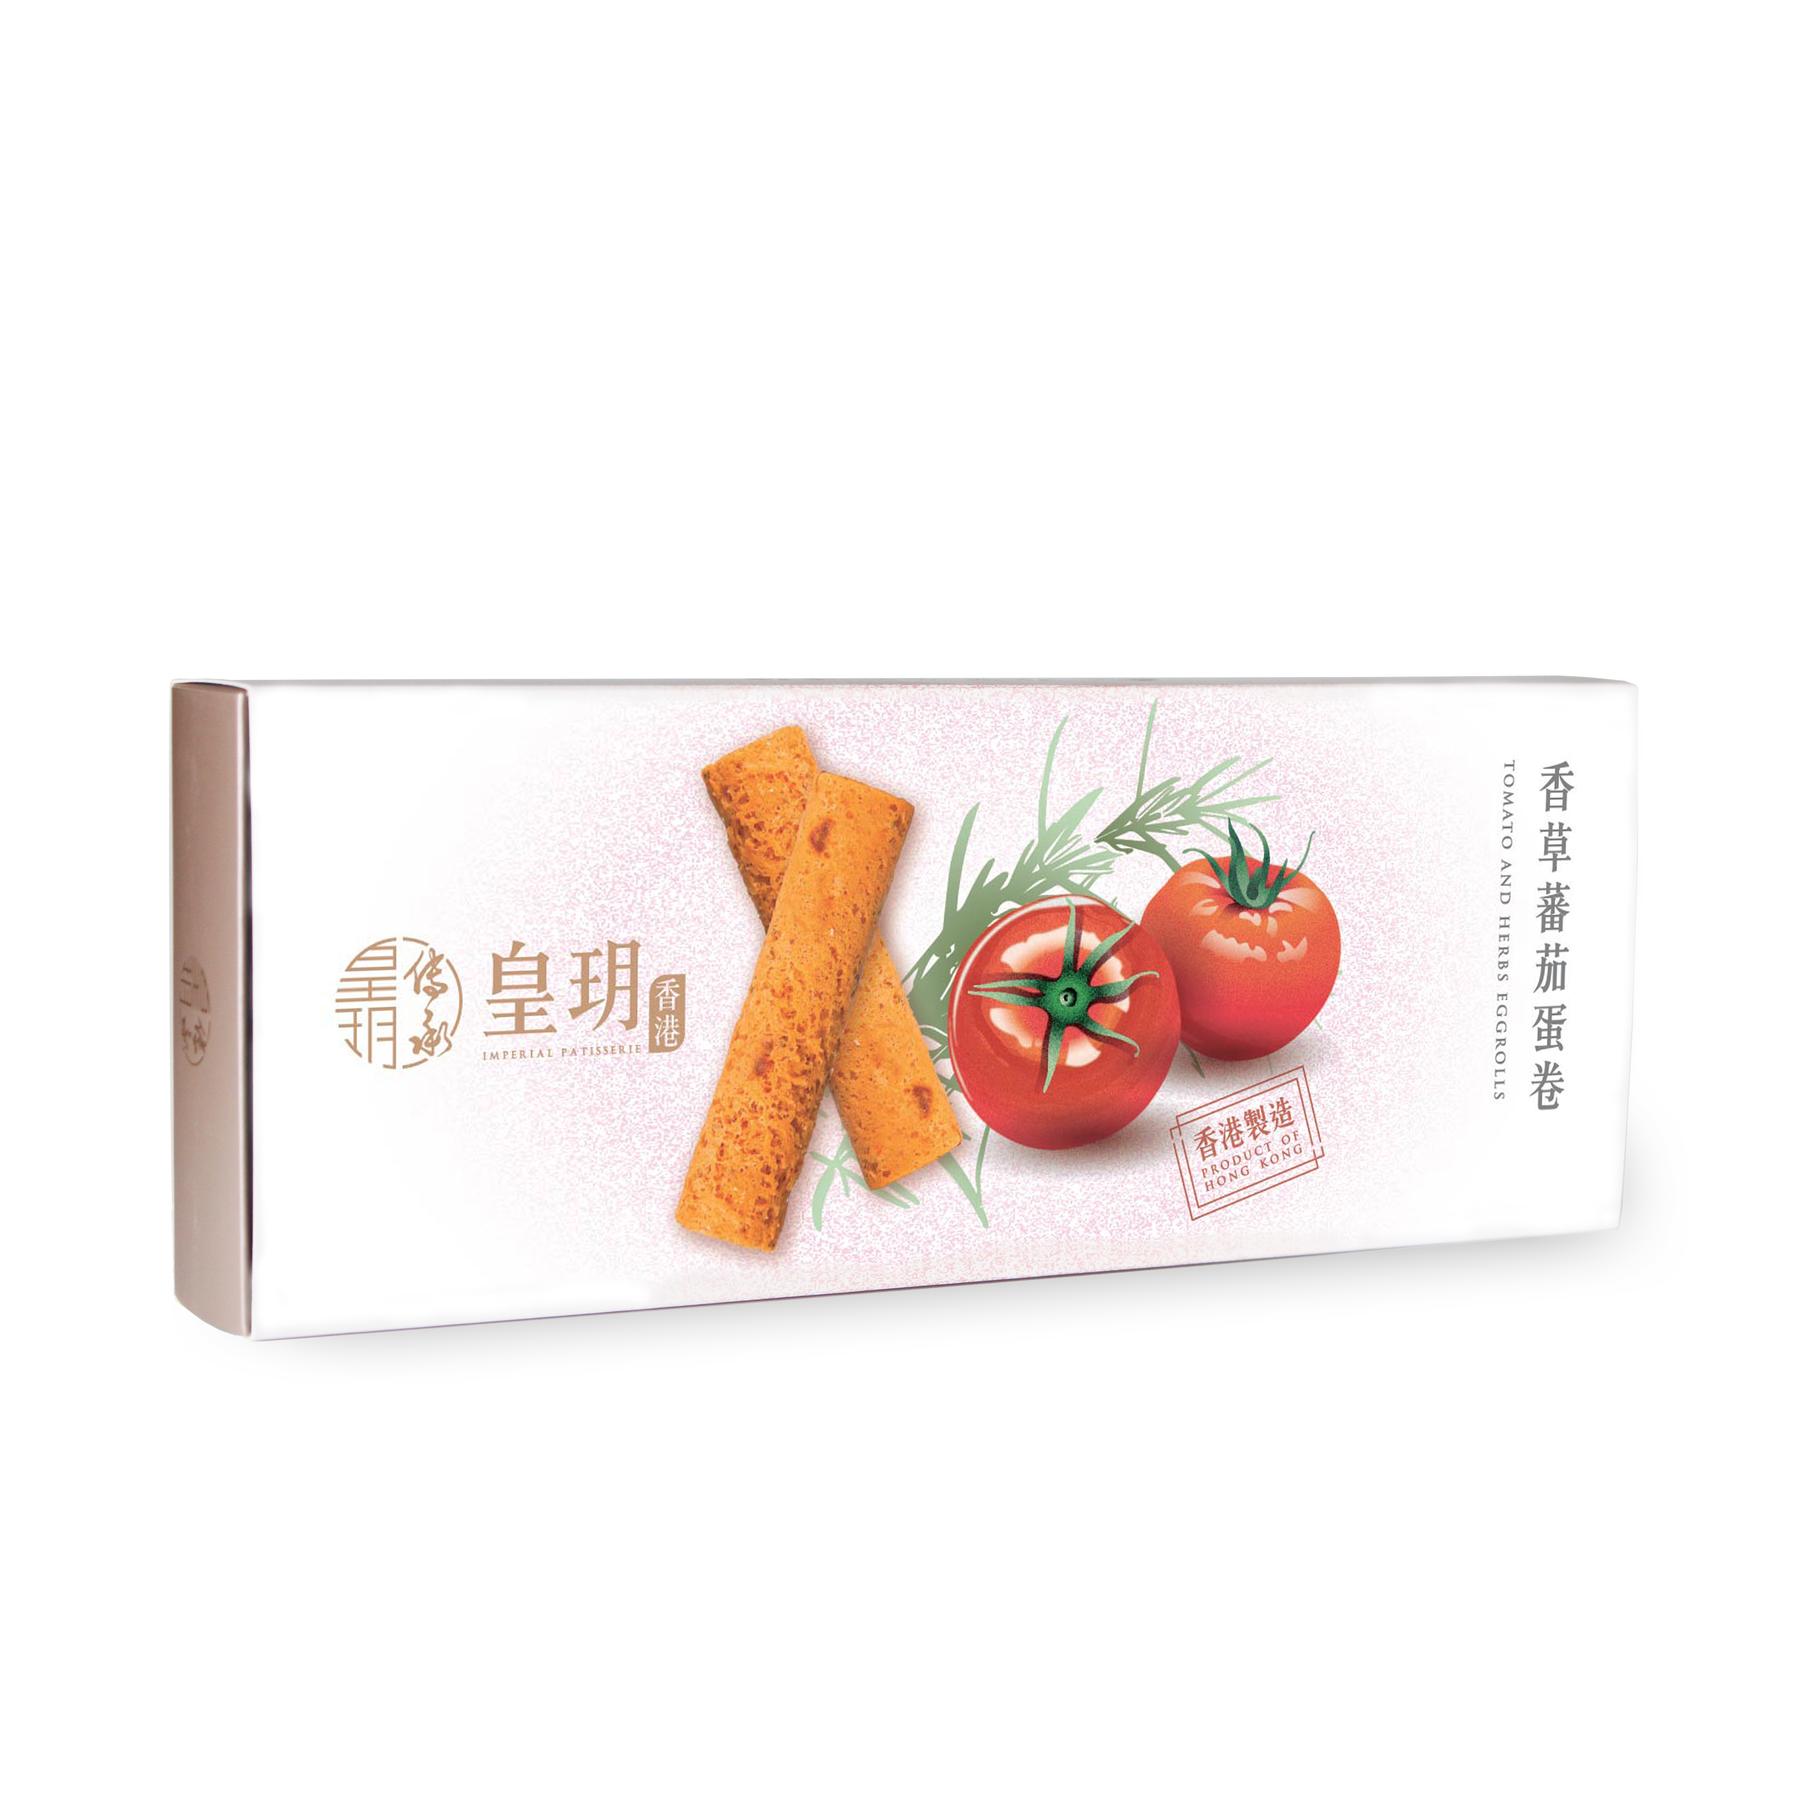 Imperial Patisserie Tomato and Herbs Eggrolls Delight Gift Set 皇玥 香草蕃茄蛋卷精裝禮盒